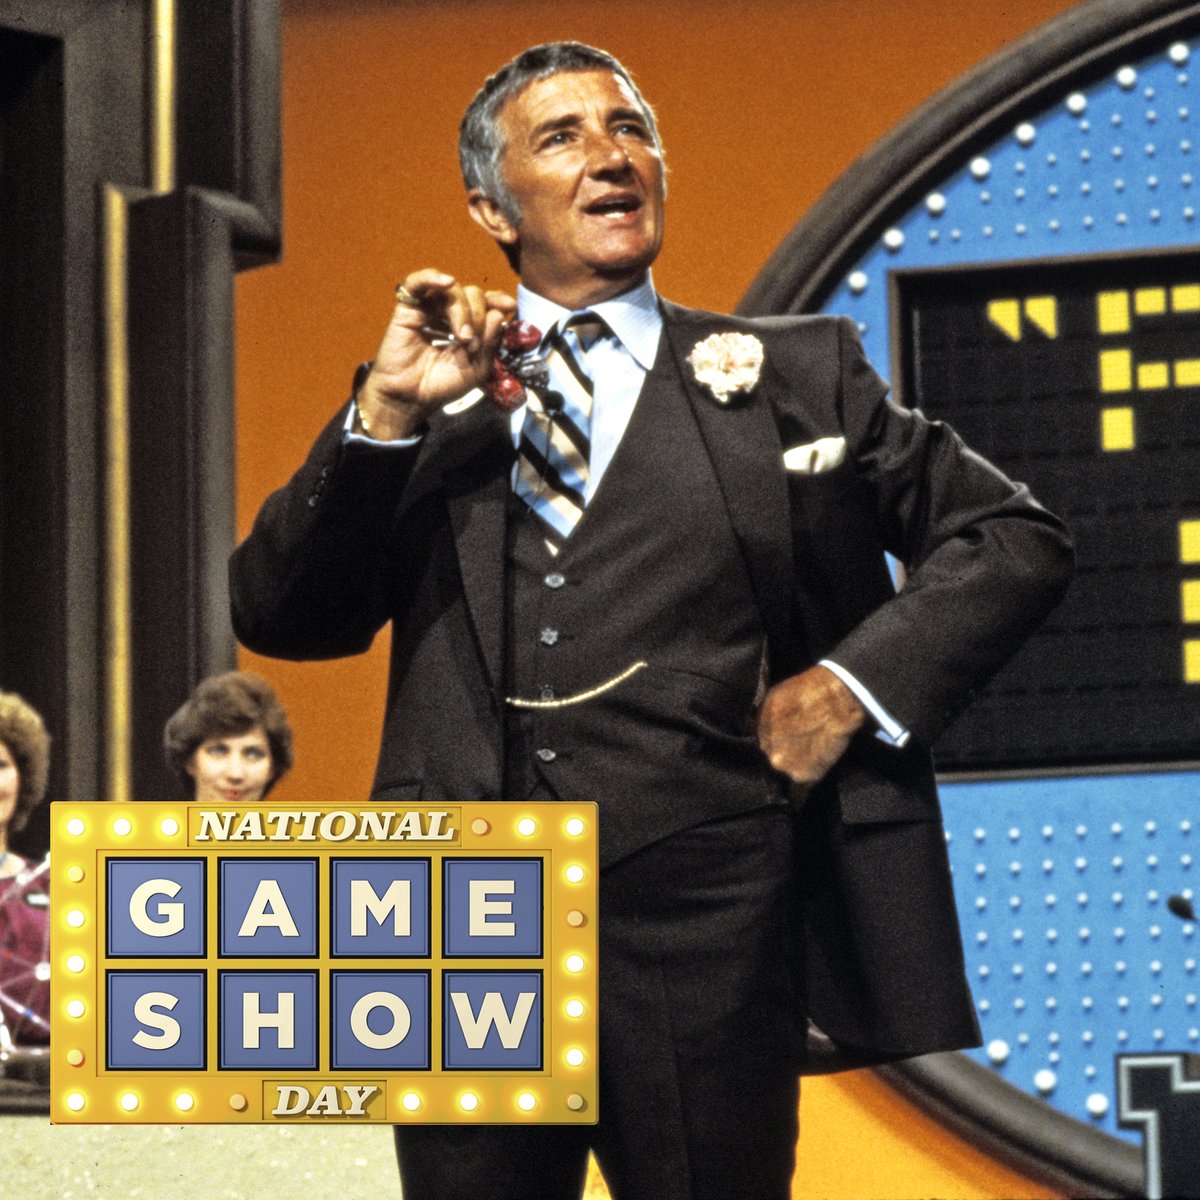 Survey Says… #NationalGameShowDay is bigger and better than ever! 🤩 Tune in to the #FamilyFeud classic channel to catch some of the most iconic #Feud moments, Tuesday, 5/28 to Sunday, 6/30 from 12-2pm ET!